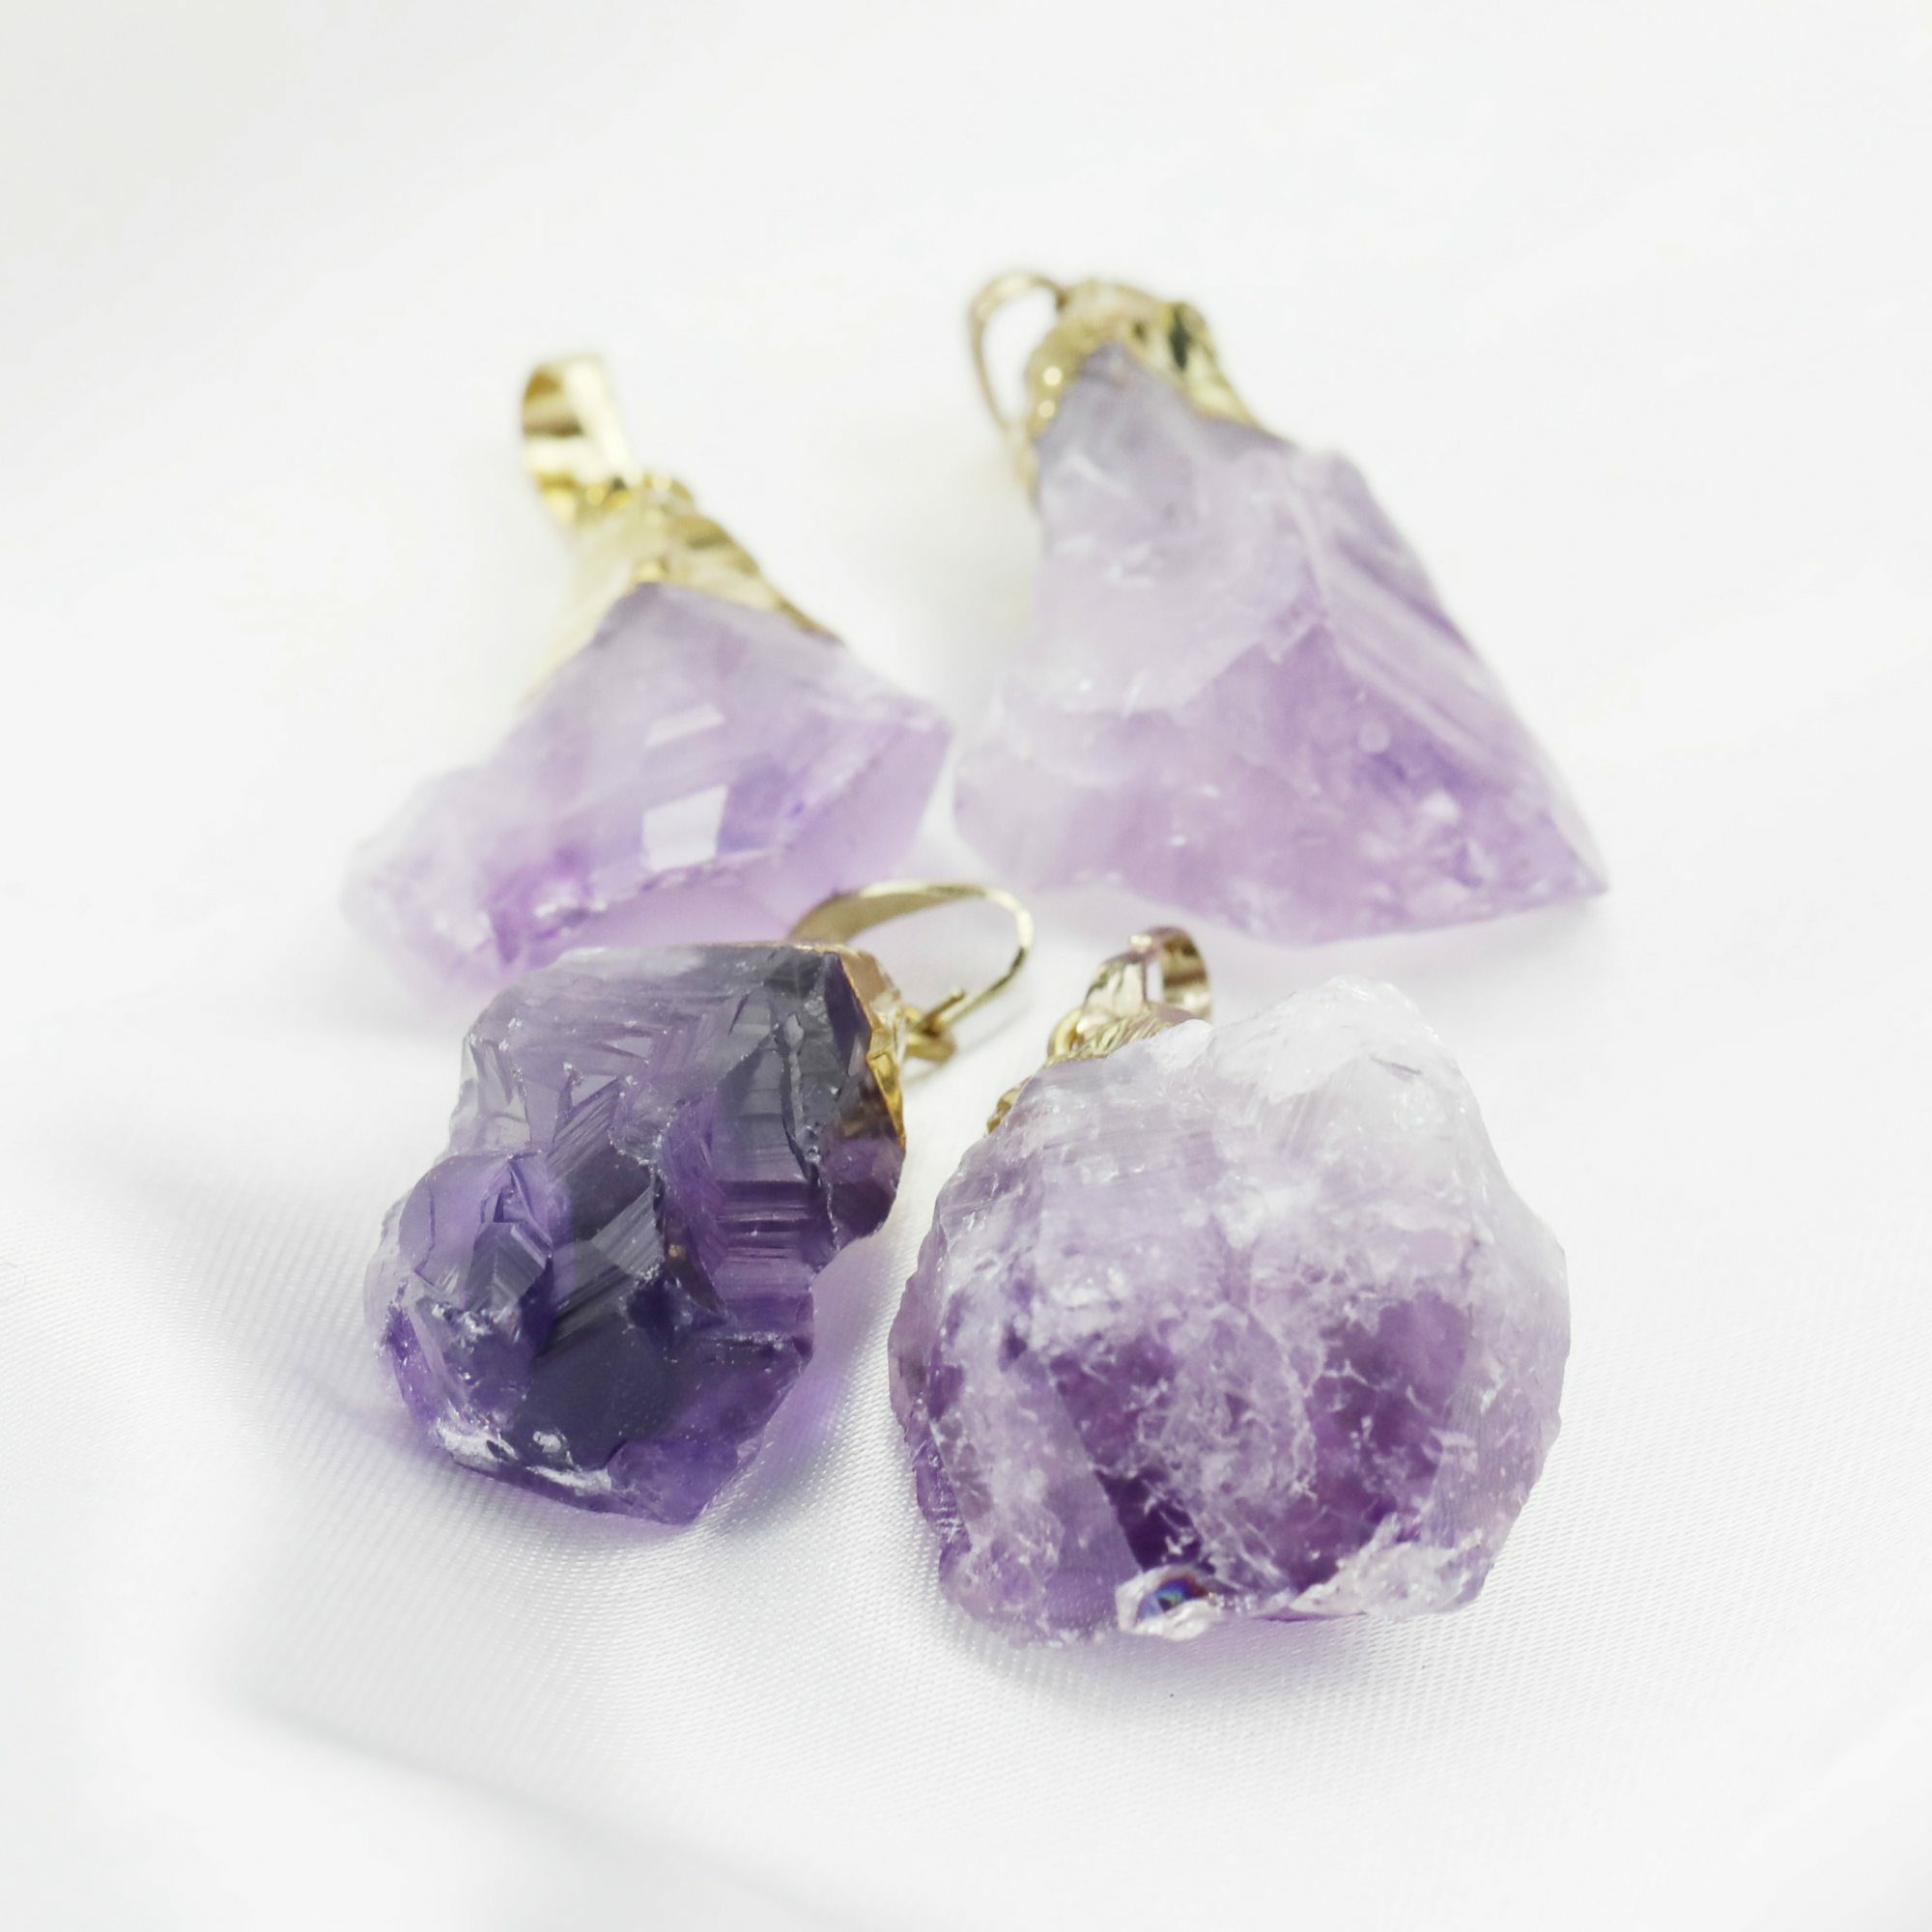 5pcs Nature Raw Amethyst Rock Pendant Charm Stone with Light Gold Plated Bail DIY Jewelry Supplies 1800525 - Click Image to Close